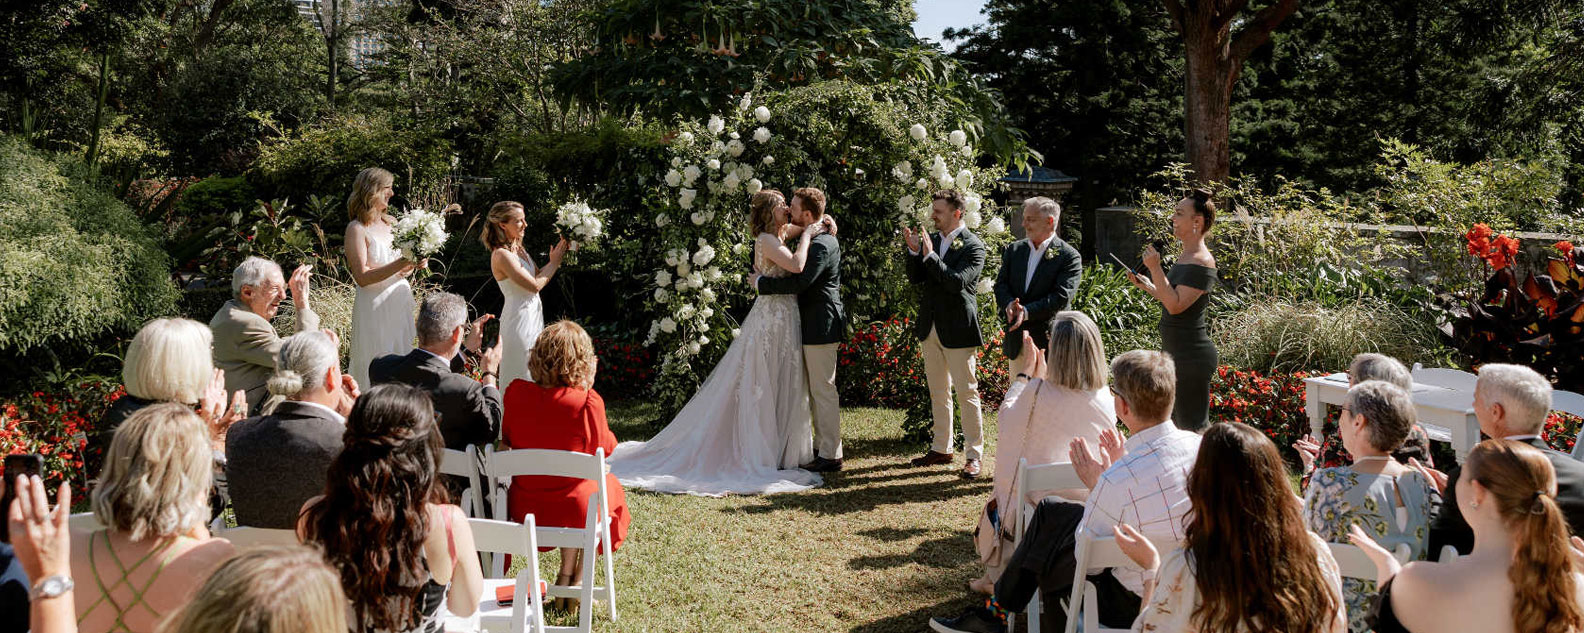 Couple kissing at a wedding ceremony with rows of seated onlookers in a garden setting.